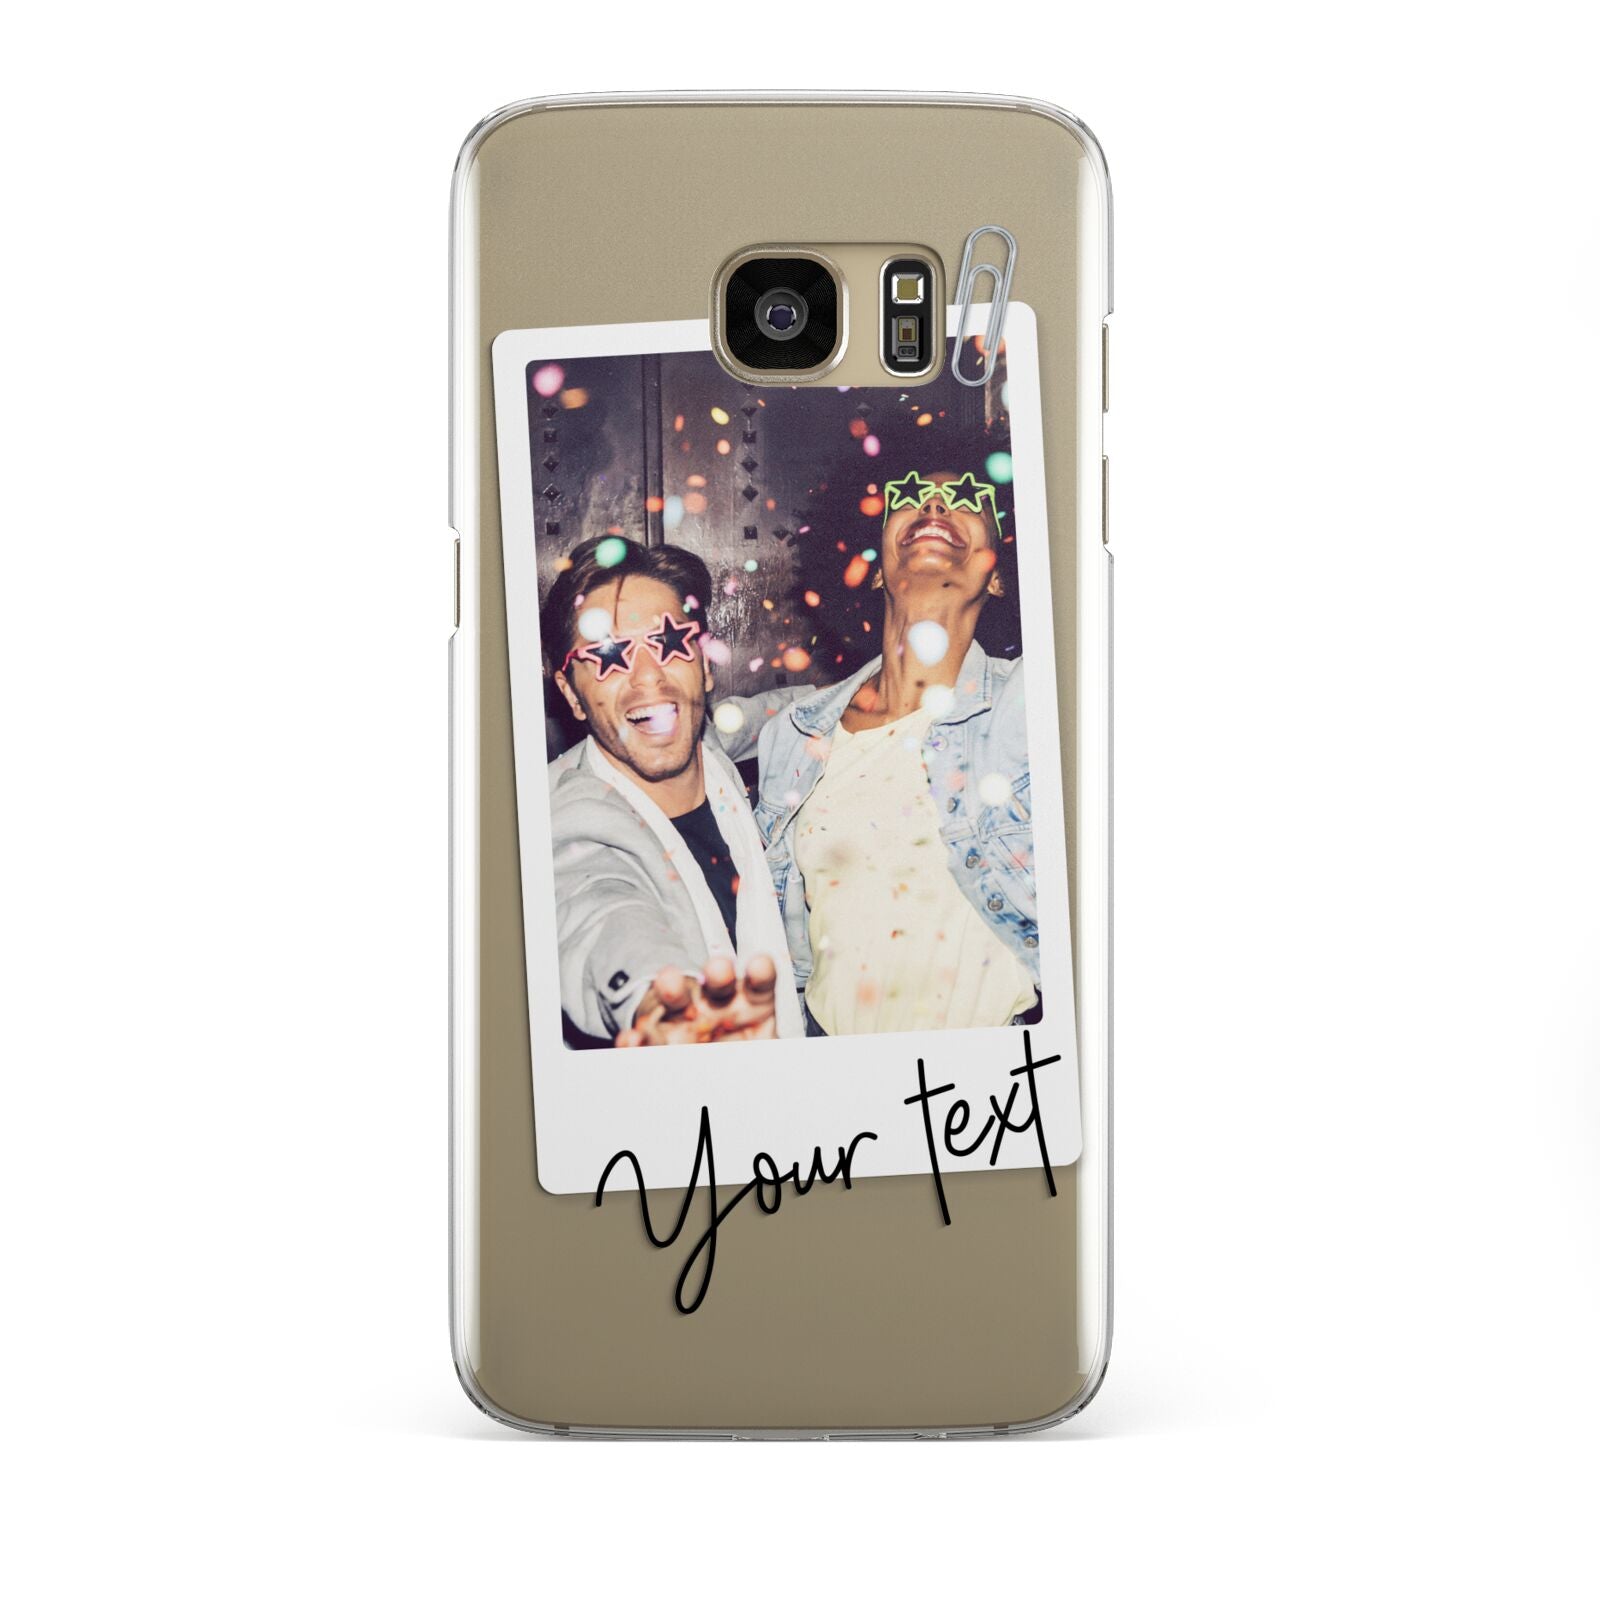 Personalised Photo with Text Samsung Galaxy S7 Edge Case